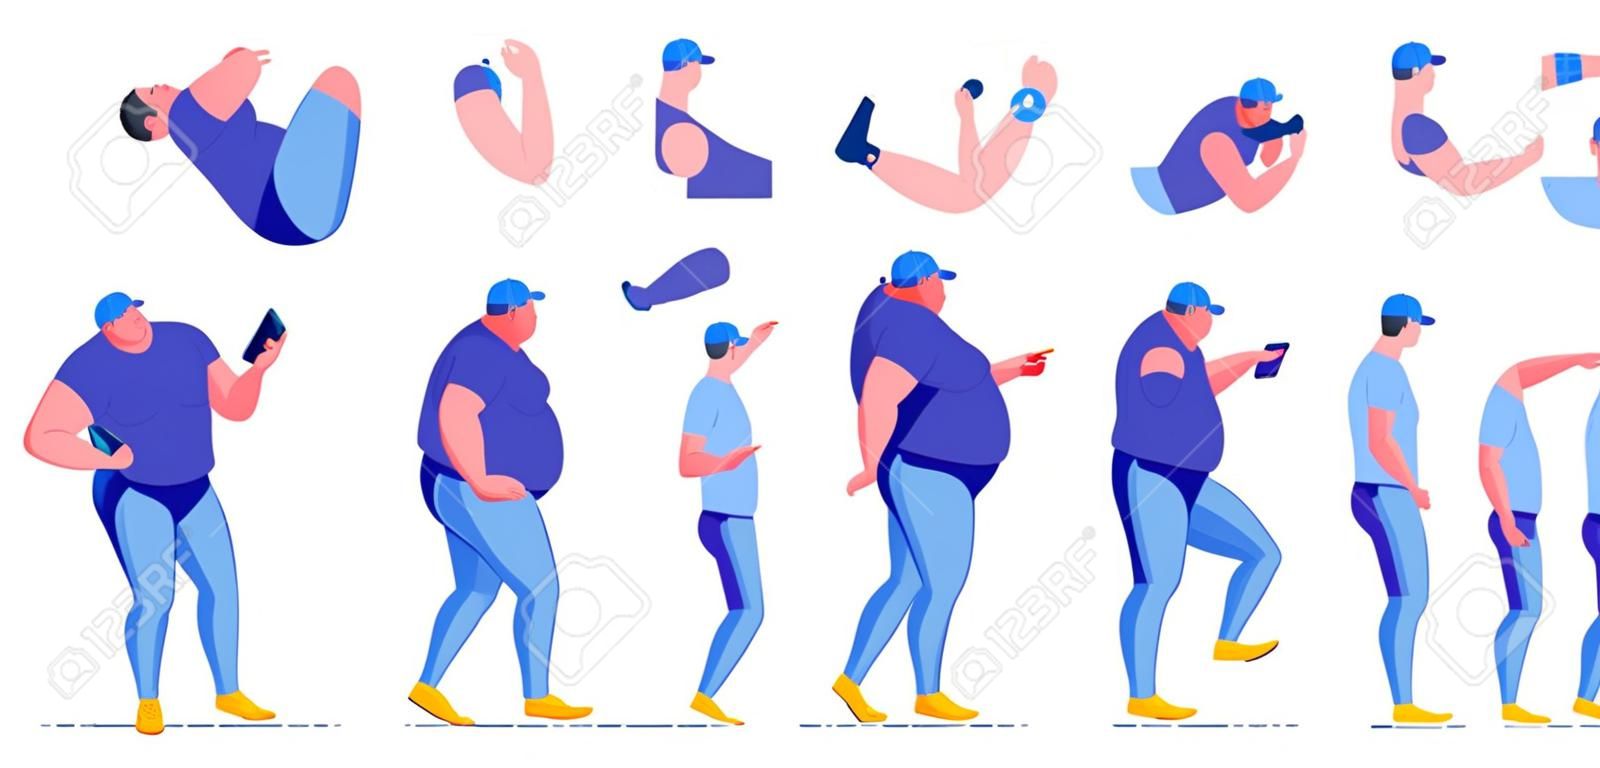 Overweight Man Creation Kit Flat Cartoon Vector Illustration. Body Parts for Animation such as Head, Arms and Legs. Different Positions and Gestures. Hands Holding Box, Wrench, Mobile Phone.